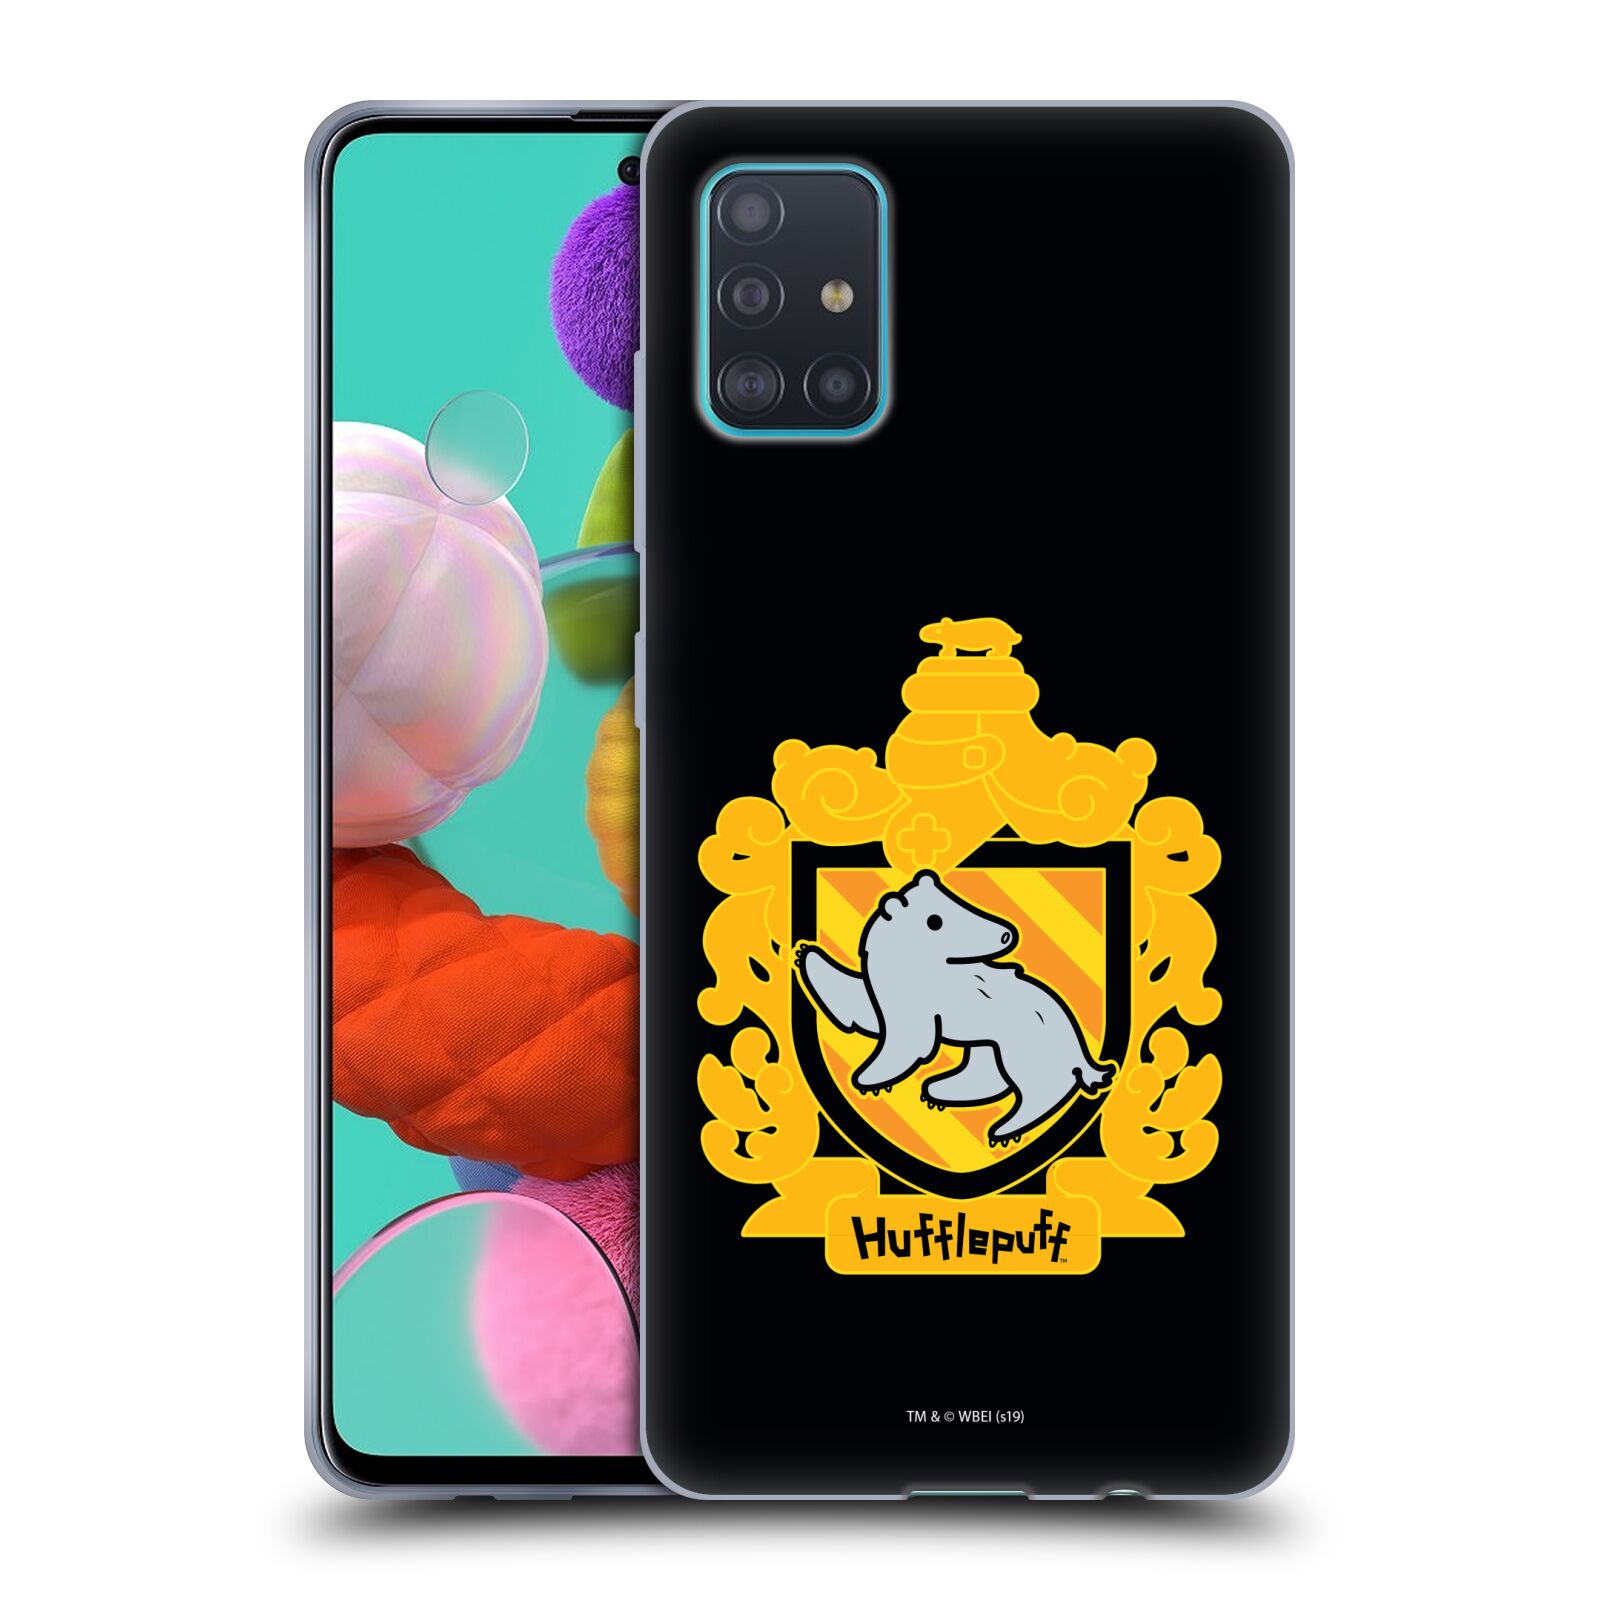 Head Case Designs Officially Licensed Harry Potter Deathly Hallows I Hufflepuff Crest Soft Gel Case Compatible with Samsung Galaxy A51 (2019) - image 1 of 7